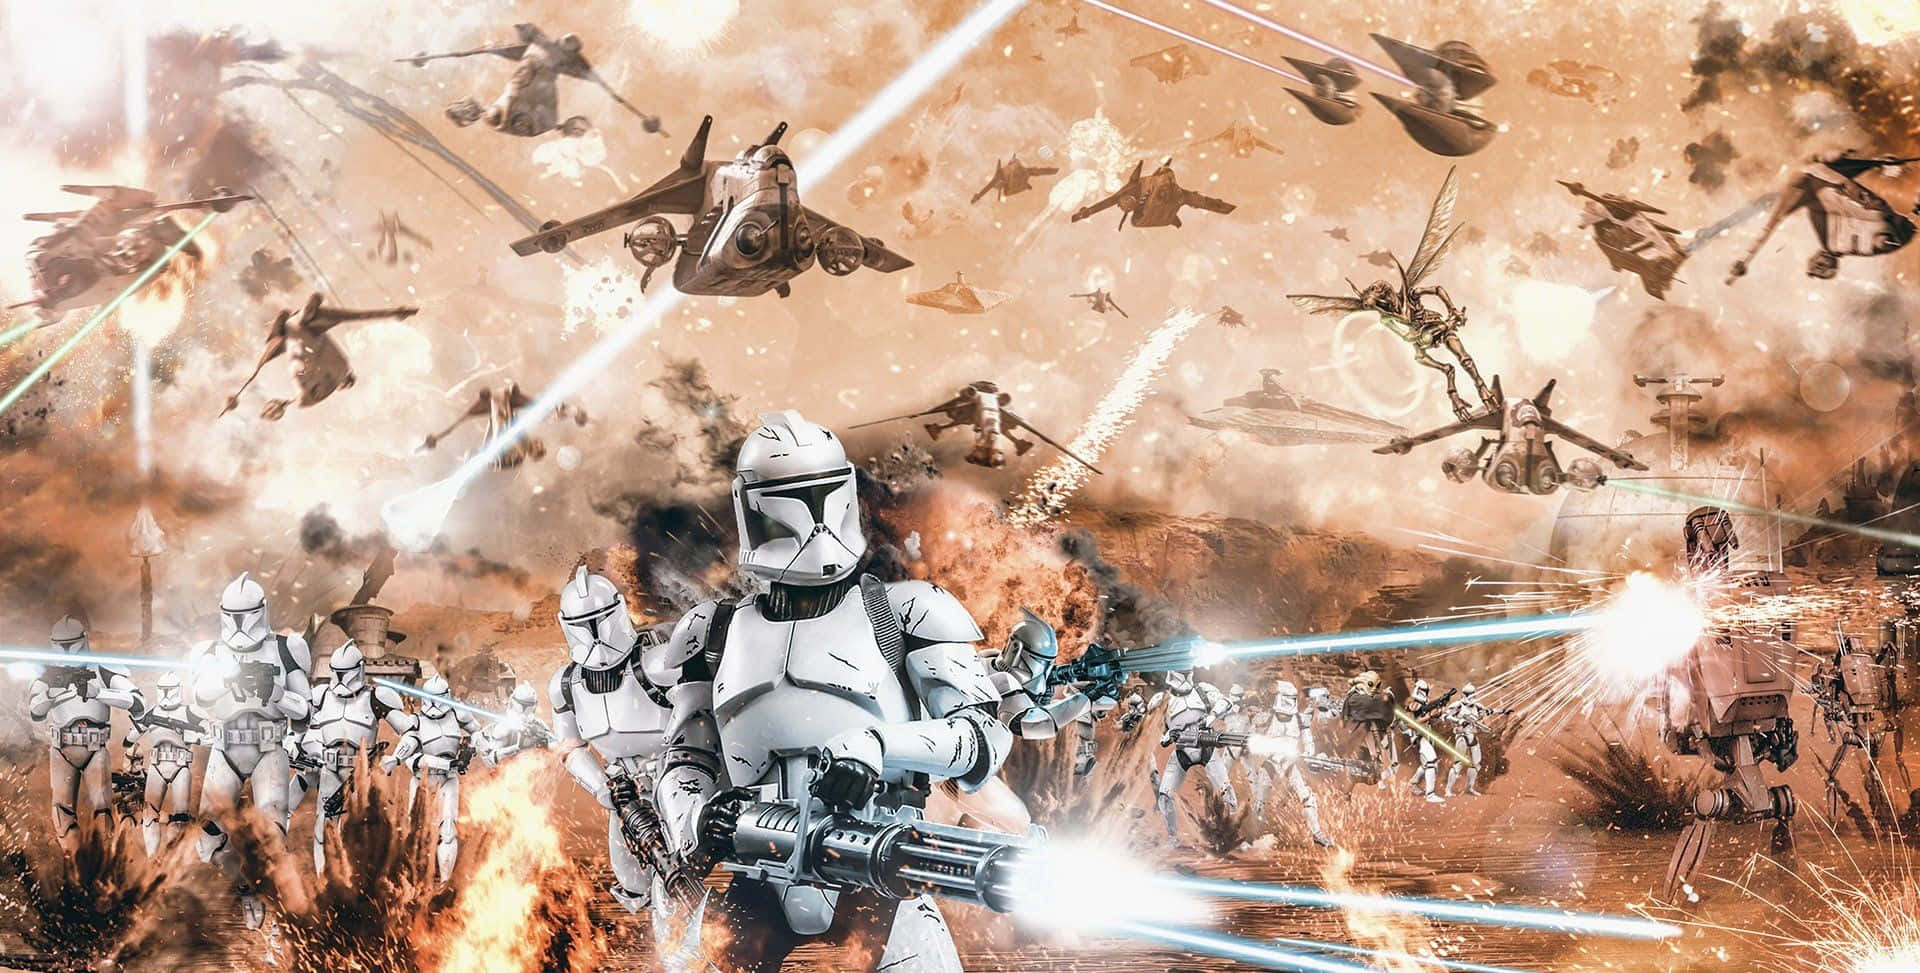 A Regiment Of Clone Troopers Clad In White Armor, Marching To Fulfill Their Duty In The Galactic Republic Background